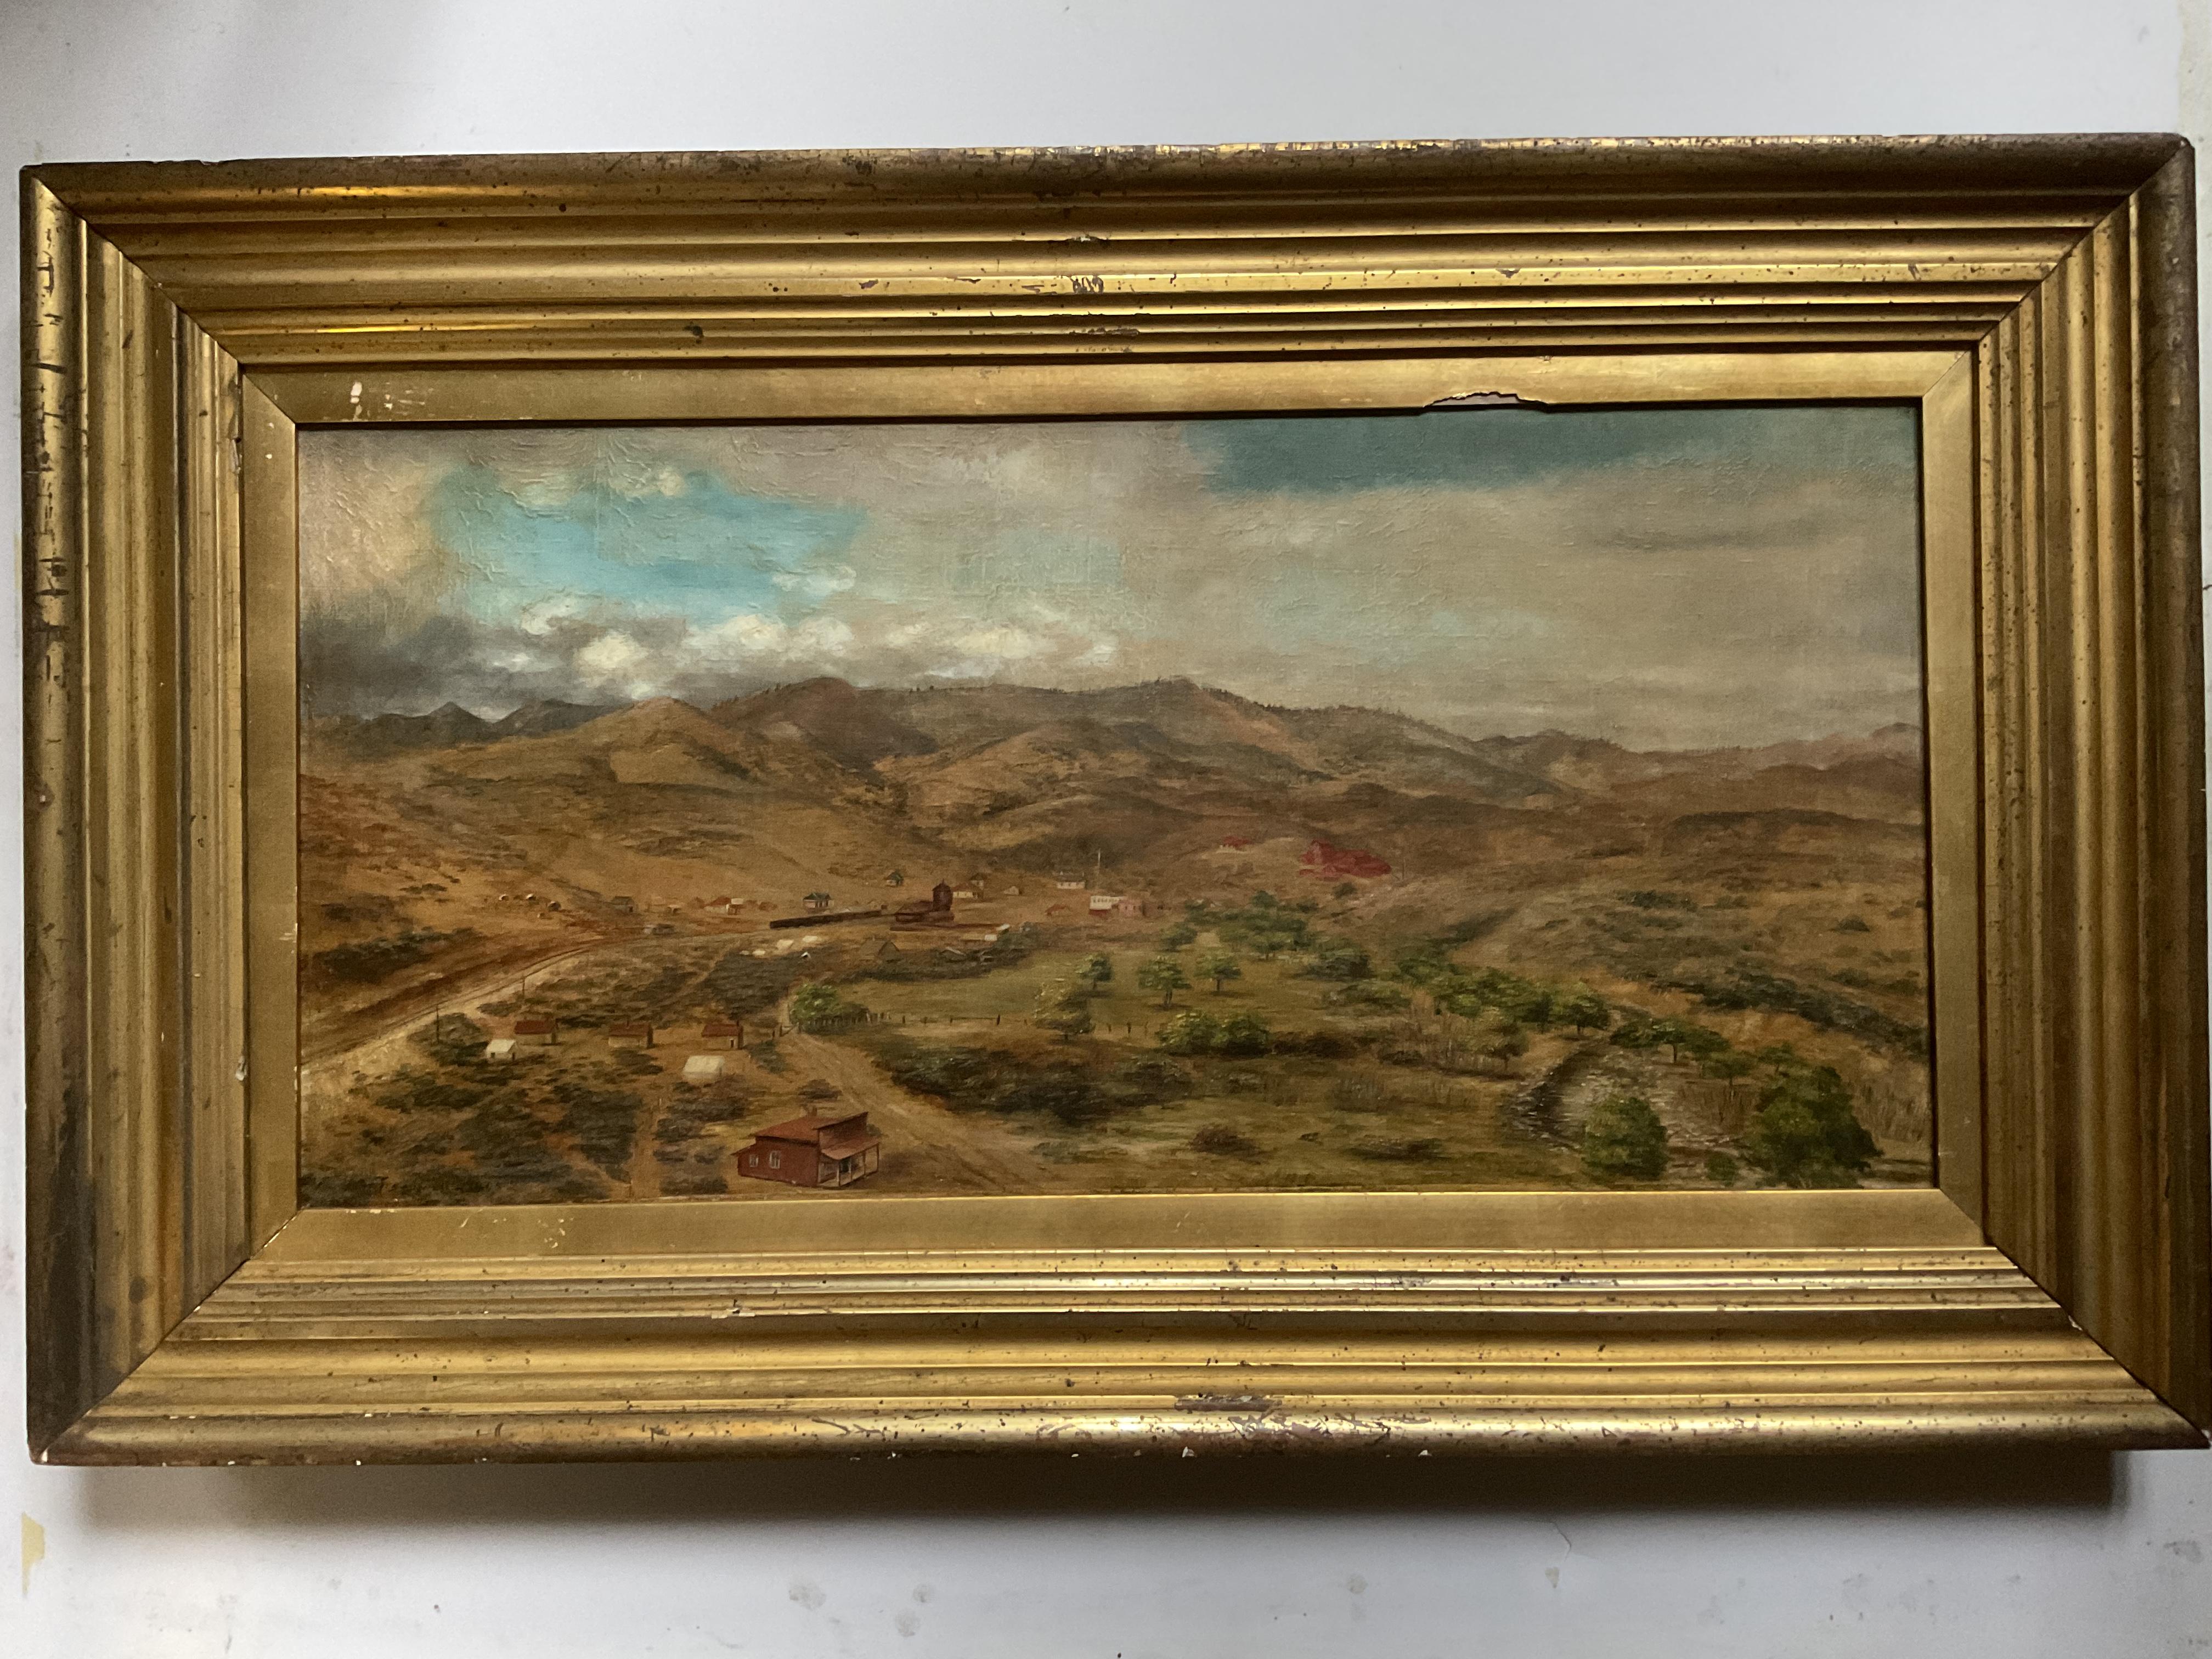 Minerva Treadwell Landscape Painting - Rare California or Western Mining Town Oil Painting by Listed Artist M Treadwell